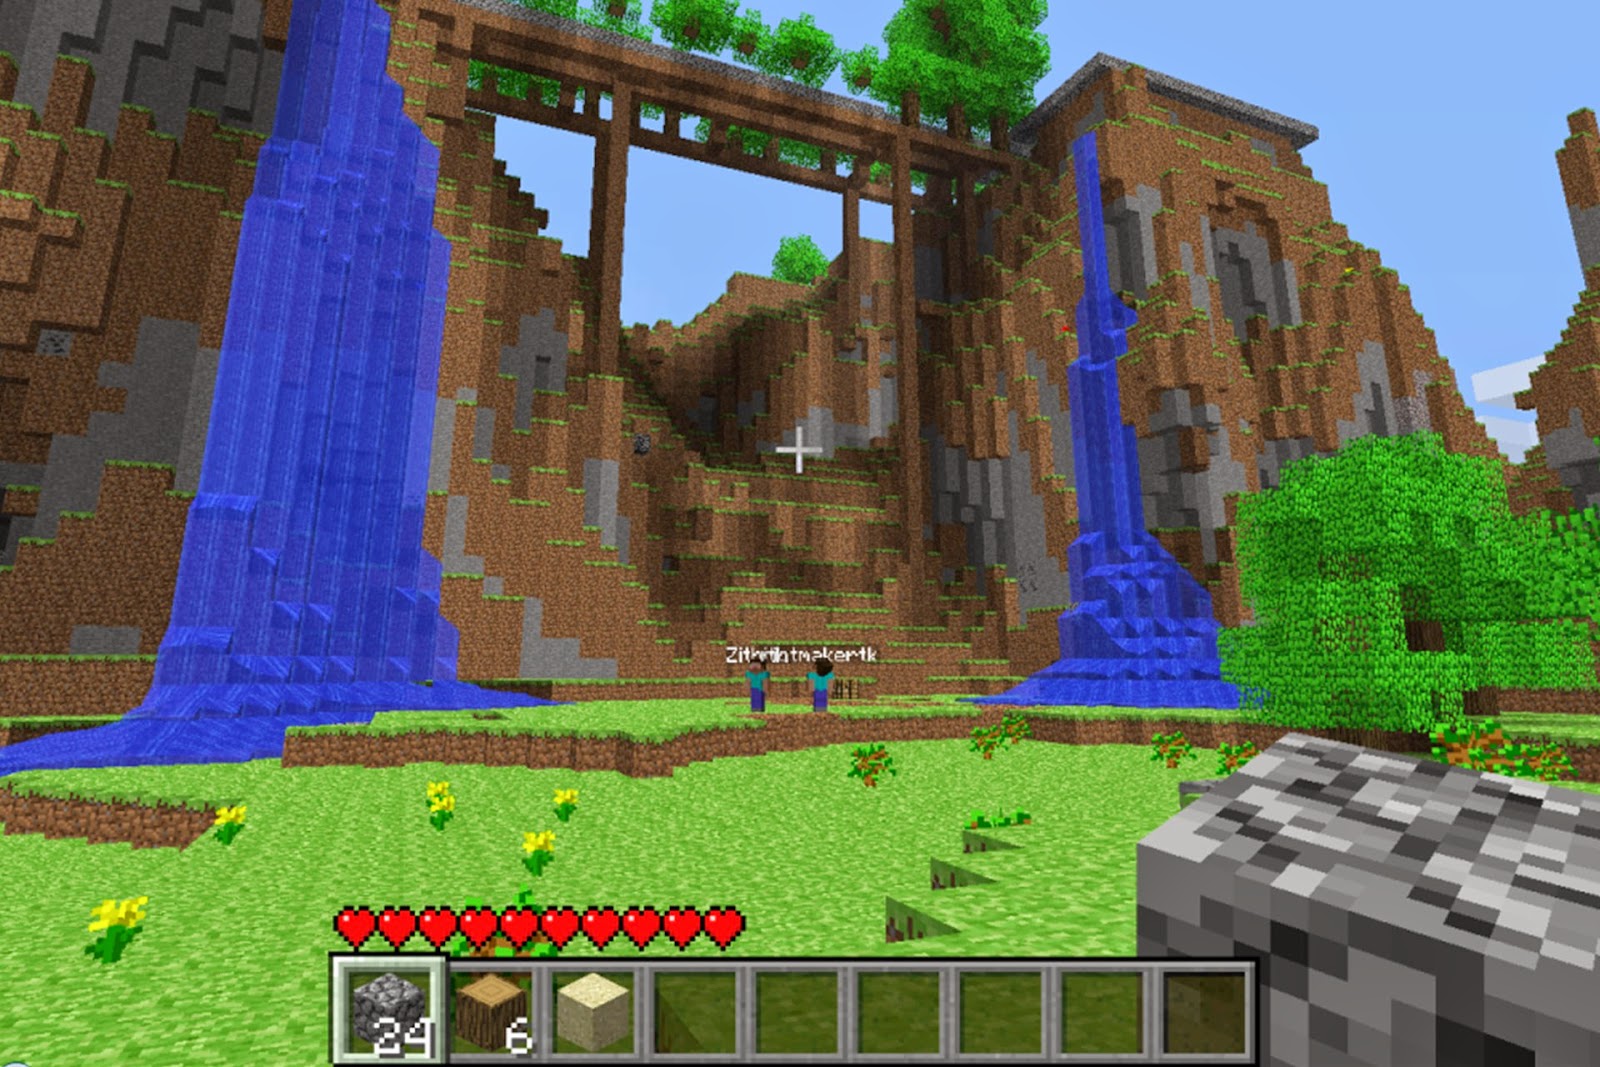 Download Minecraft 1.7.10 Full Game for PC - The Ultimate Place for